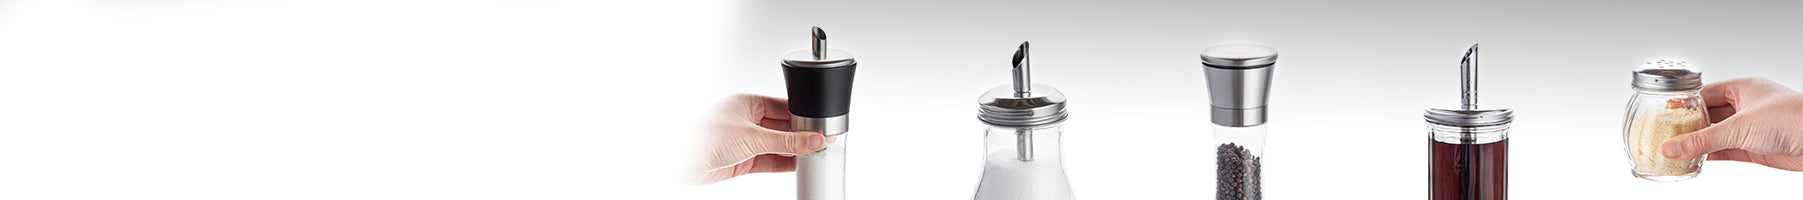 Banner_Smallwares_Kitchen-Tools_Sugar-Spice-Shakers_320